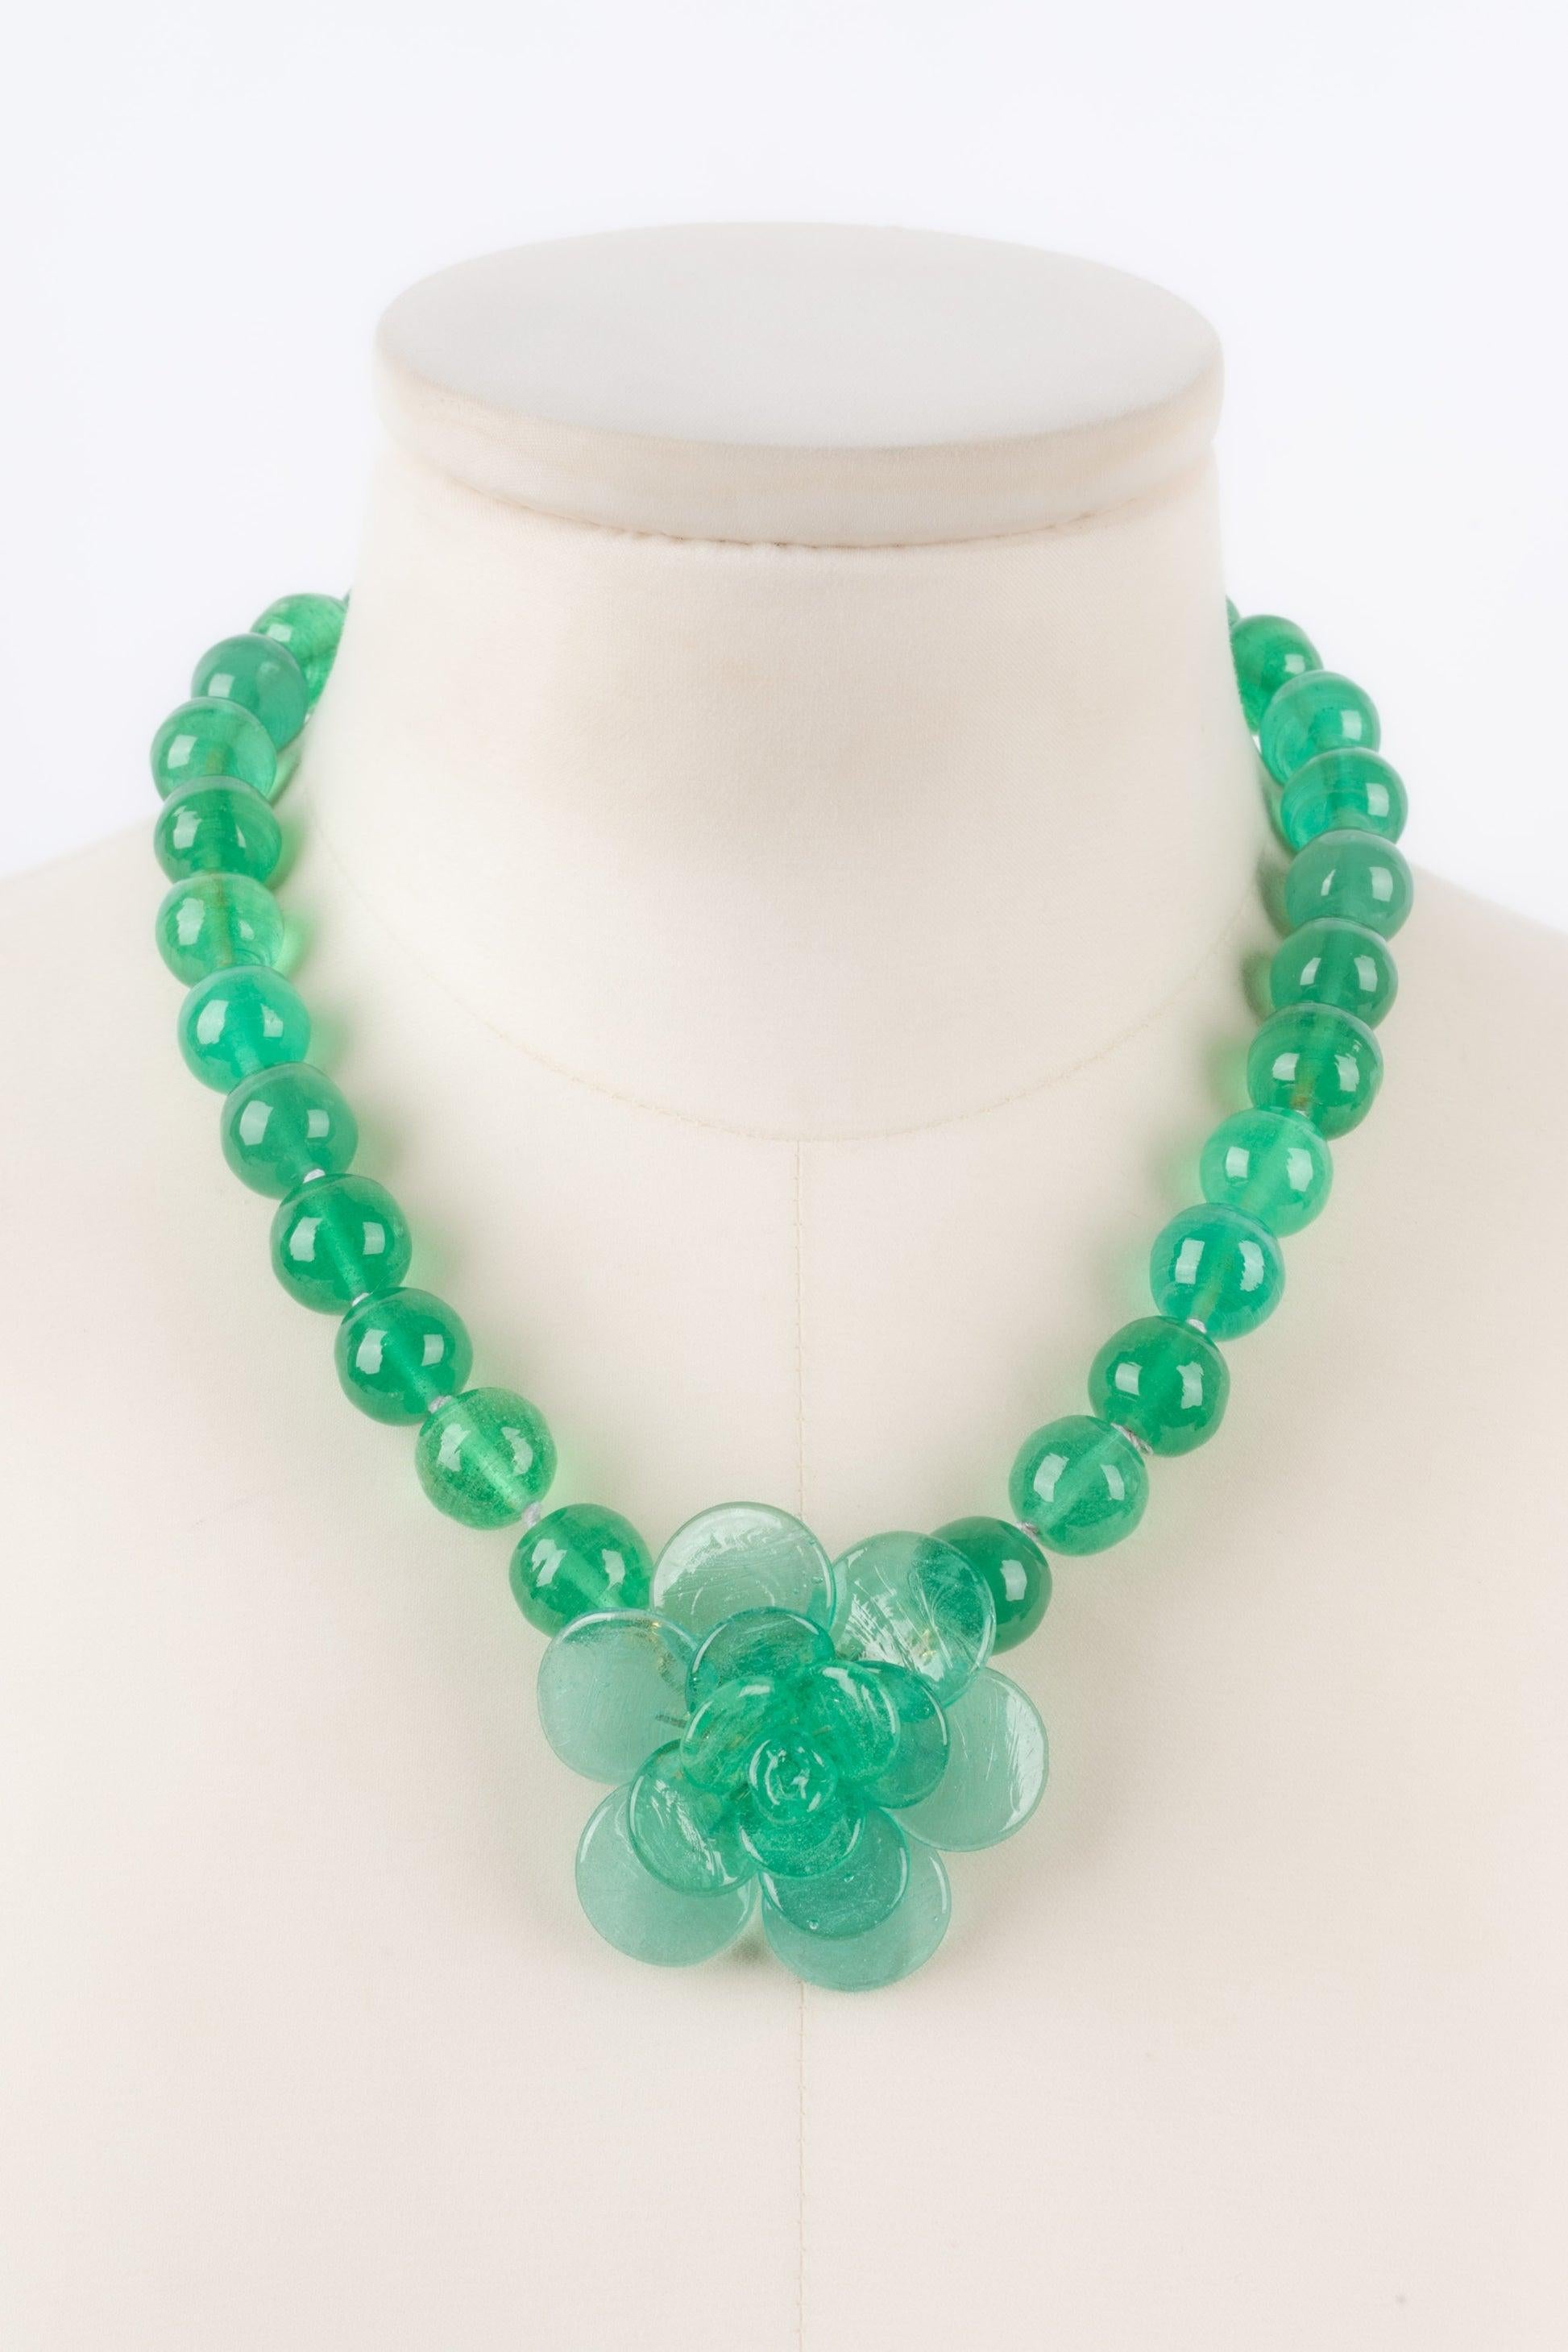 Augustine - (Made in France) Green glass paste short necklace.

Additional information:
Condition: Very good condition
Dimensions: Length: from 44 cm to 49 cm

Seller Reference: BC224